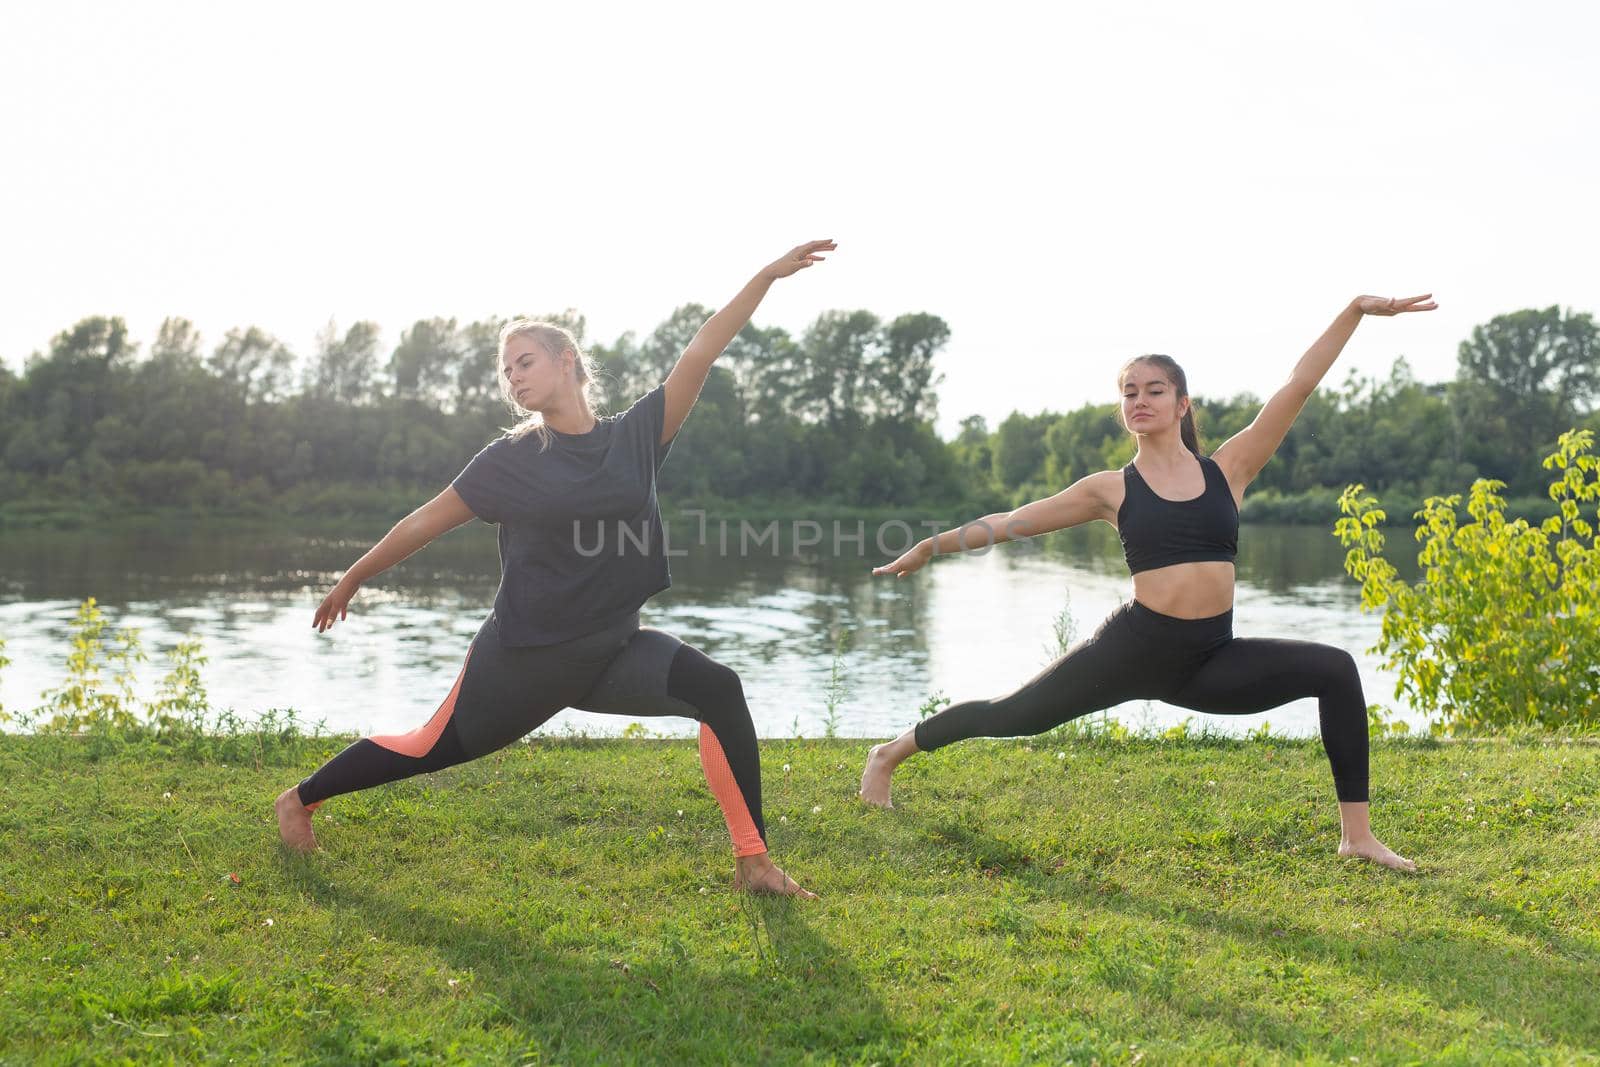 Healthy lifestyle and people concept - Flexible women doing yoga in the summer park.